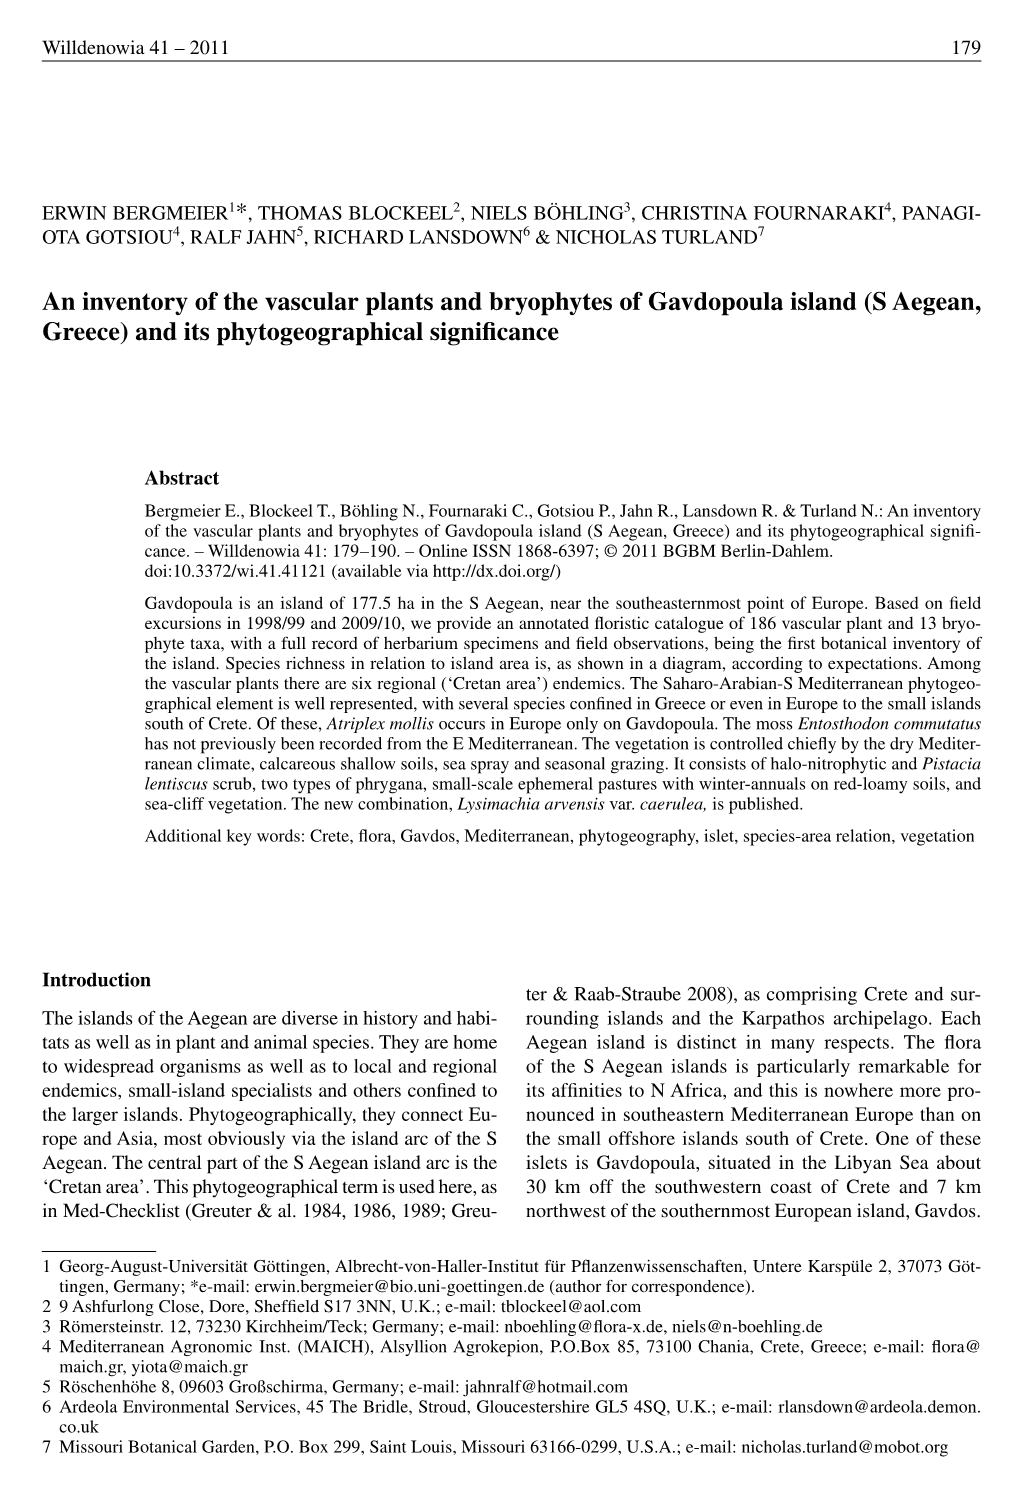 An Inventory of the Vascular Plants and Bryophytes of Gavdopoula Island (S Aegean, Greece) and Its Phytogeographical Significance